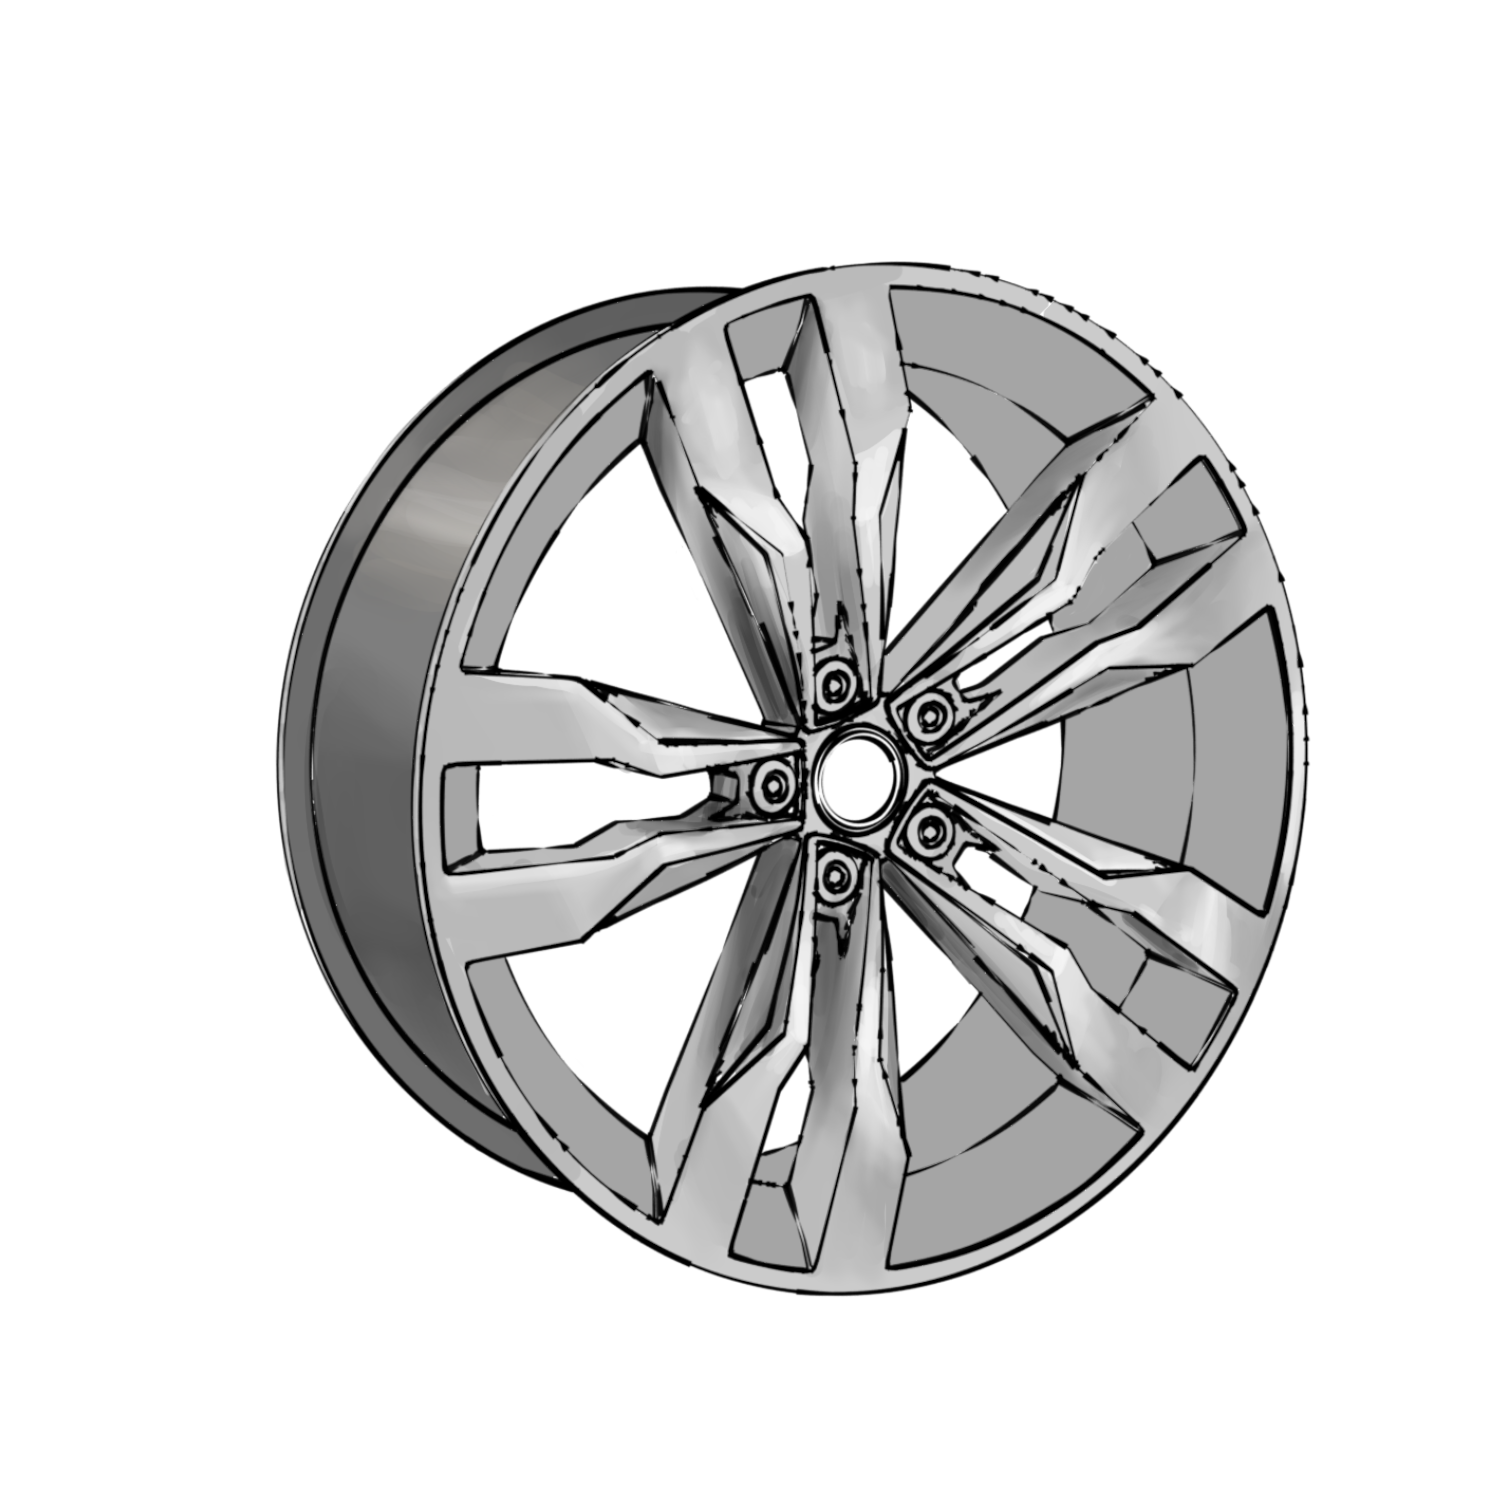  Product image 1 of the product “R8 Basic Rim 16''”